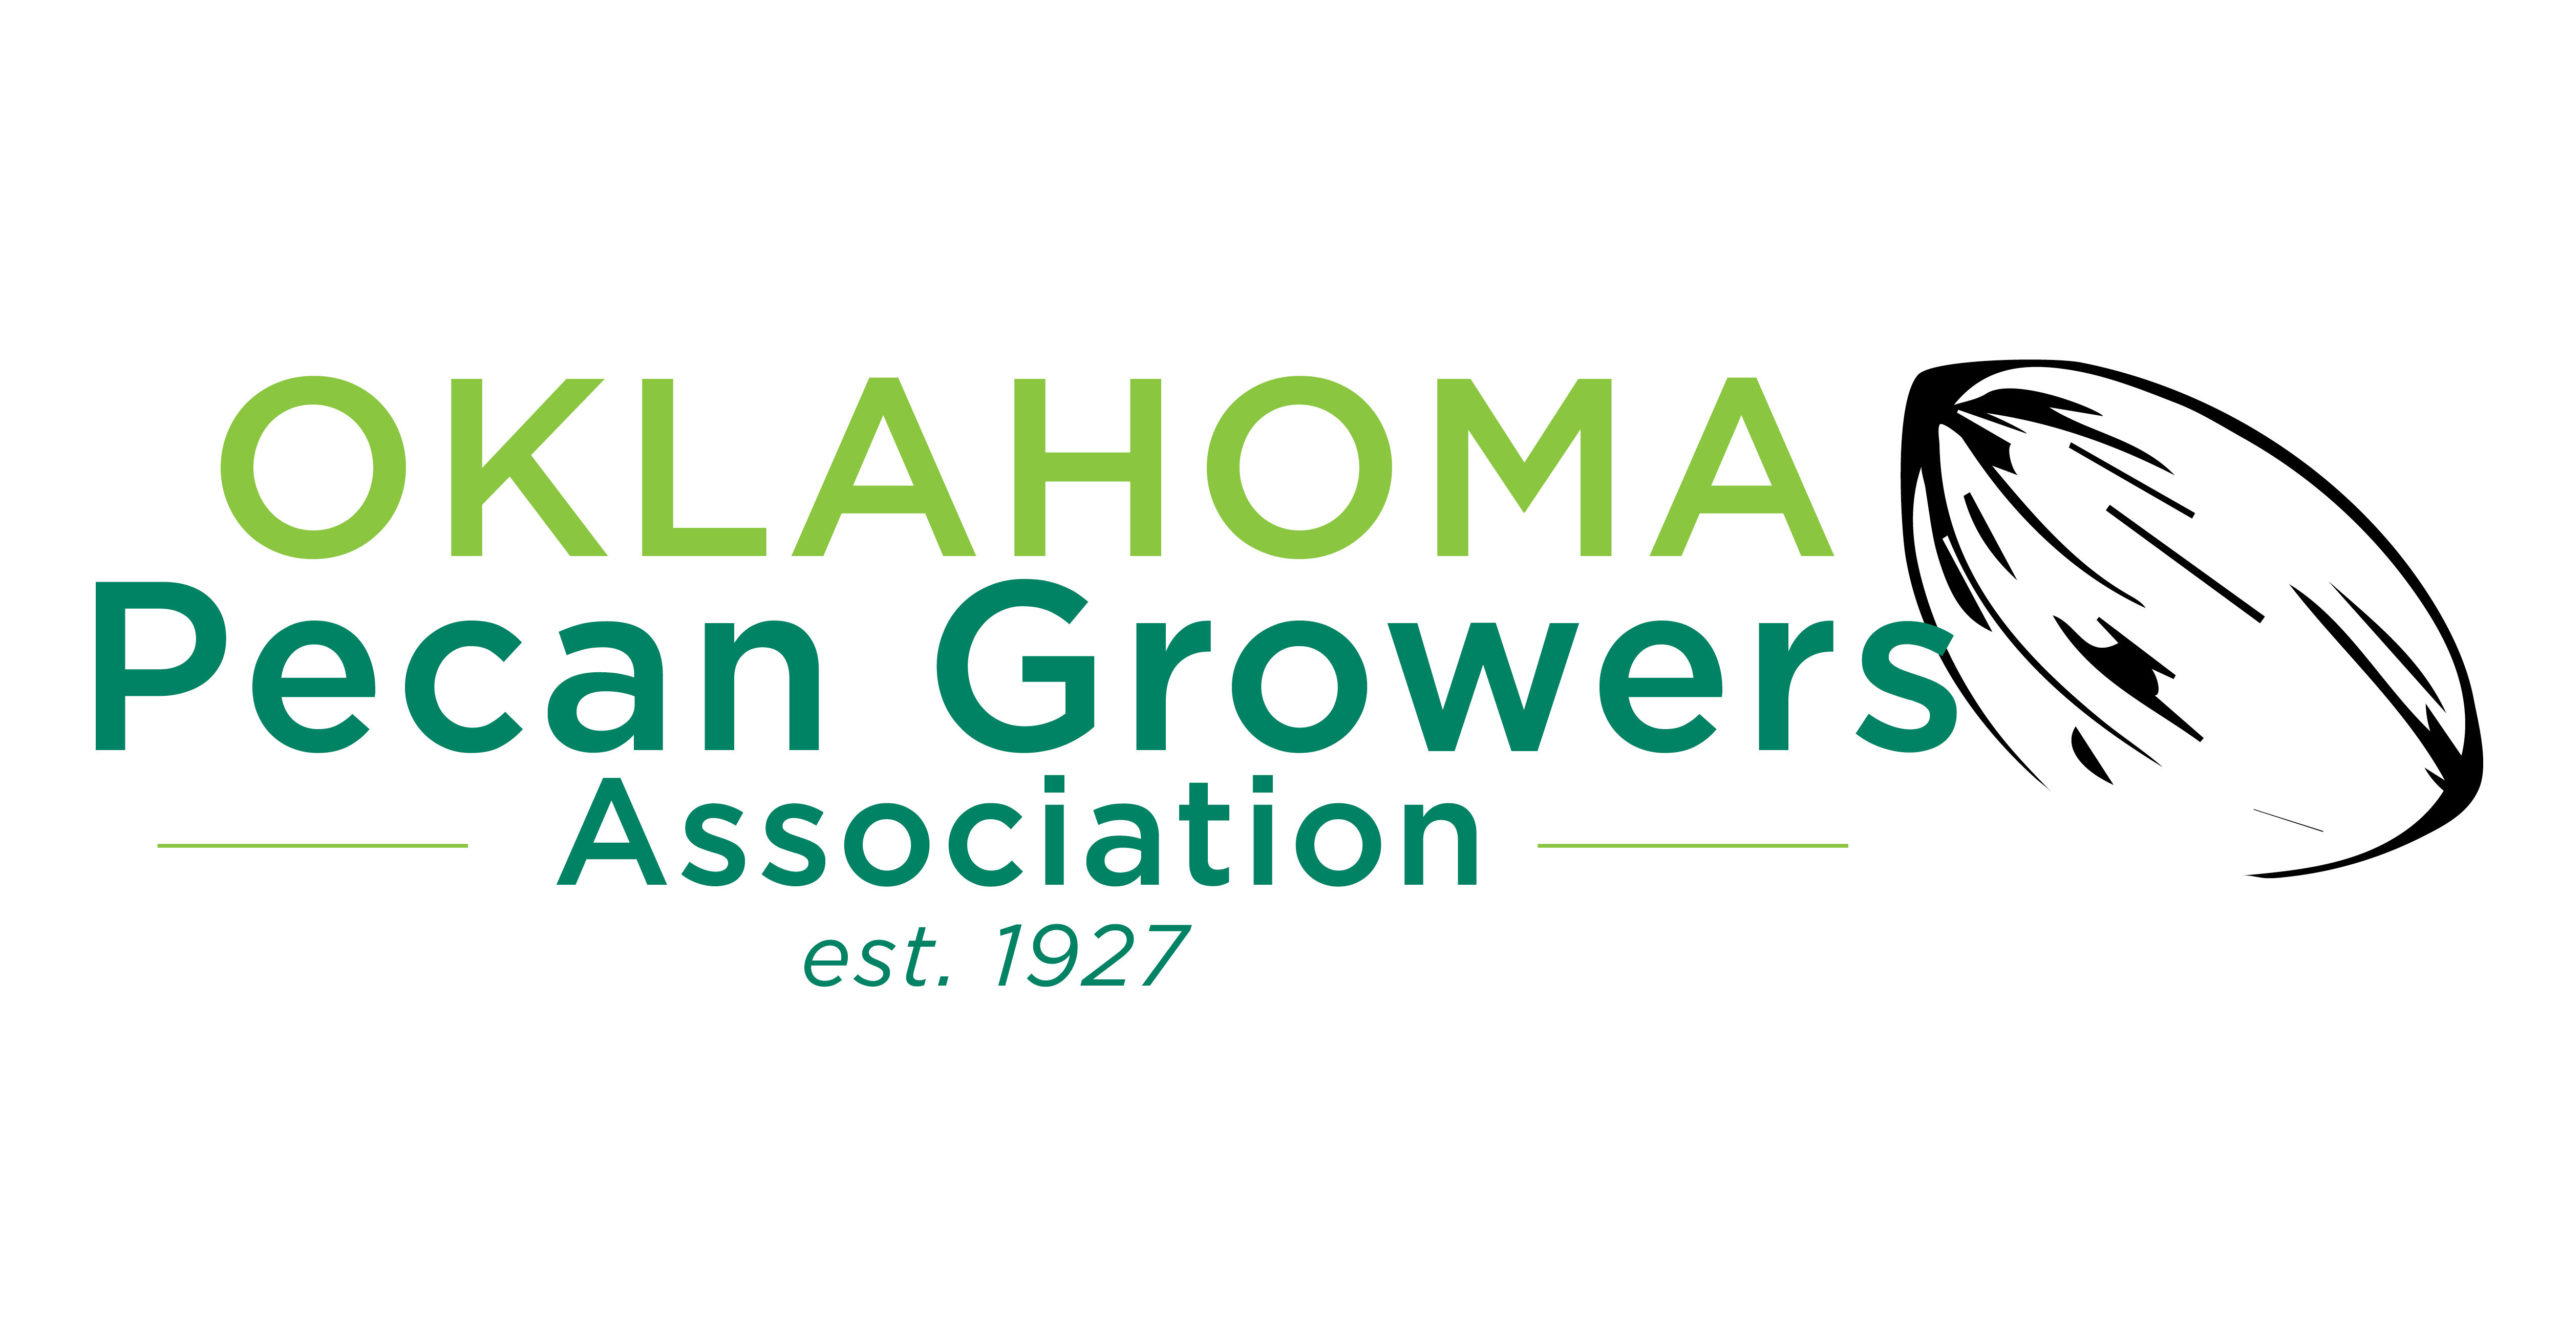 Oklahoma Pecan Growers Association plans annual convention National